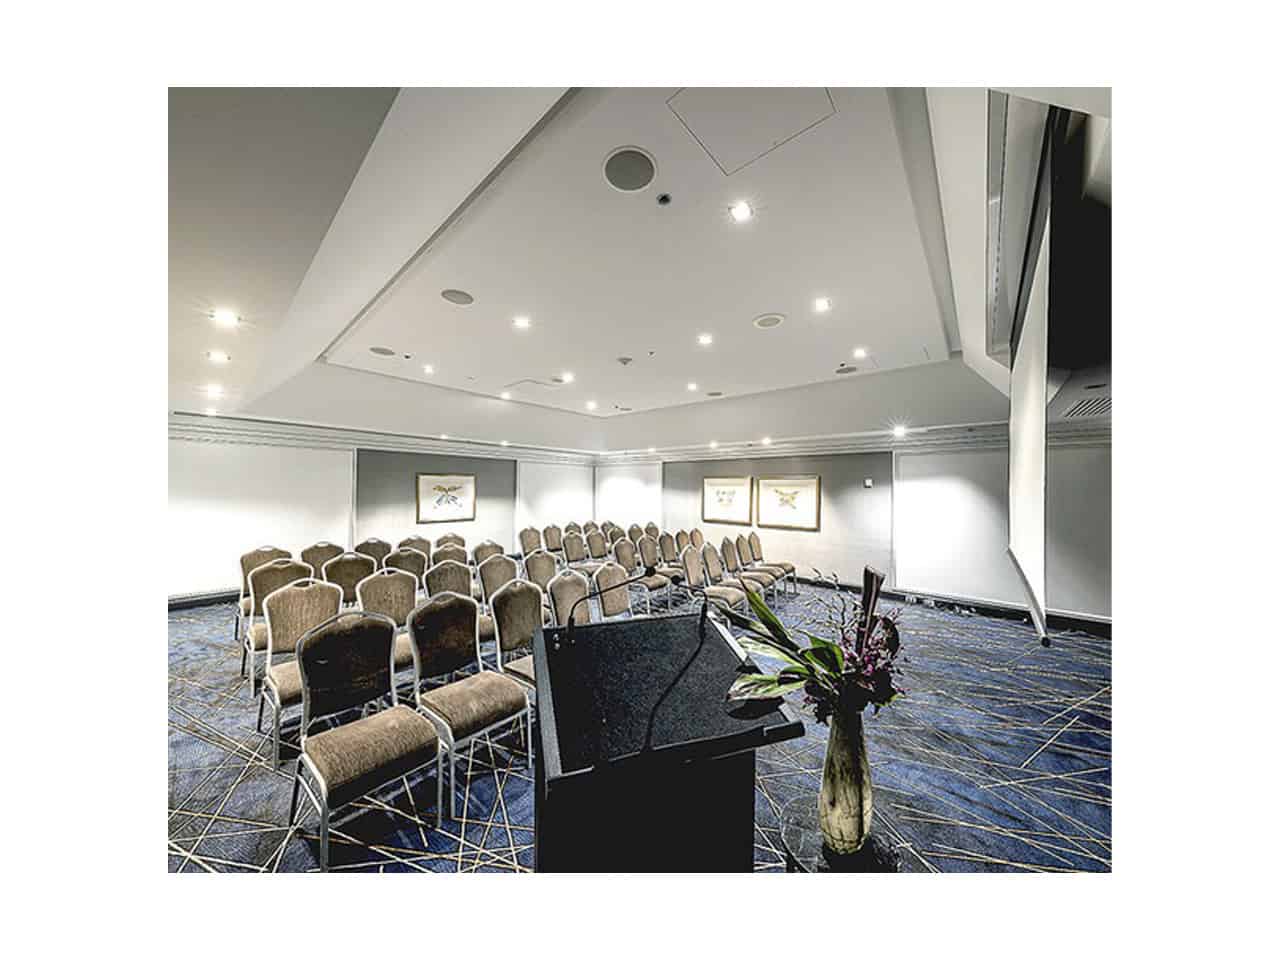 Conference event space